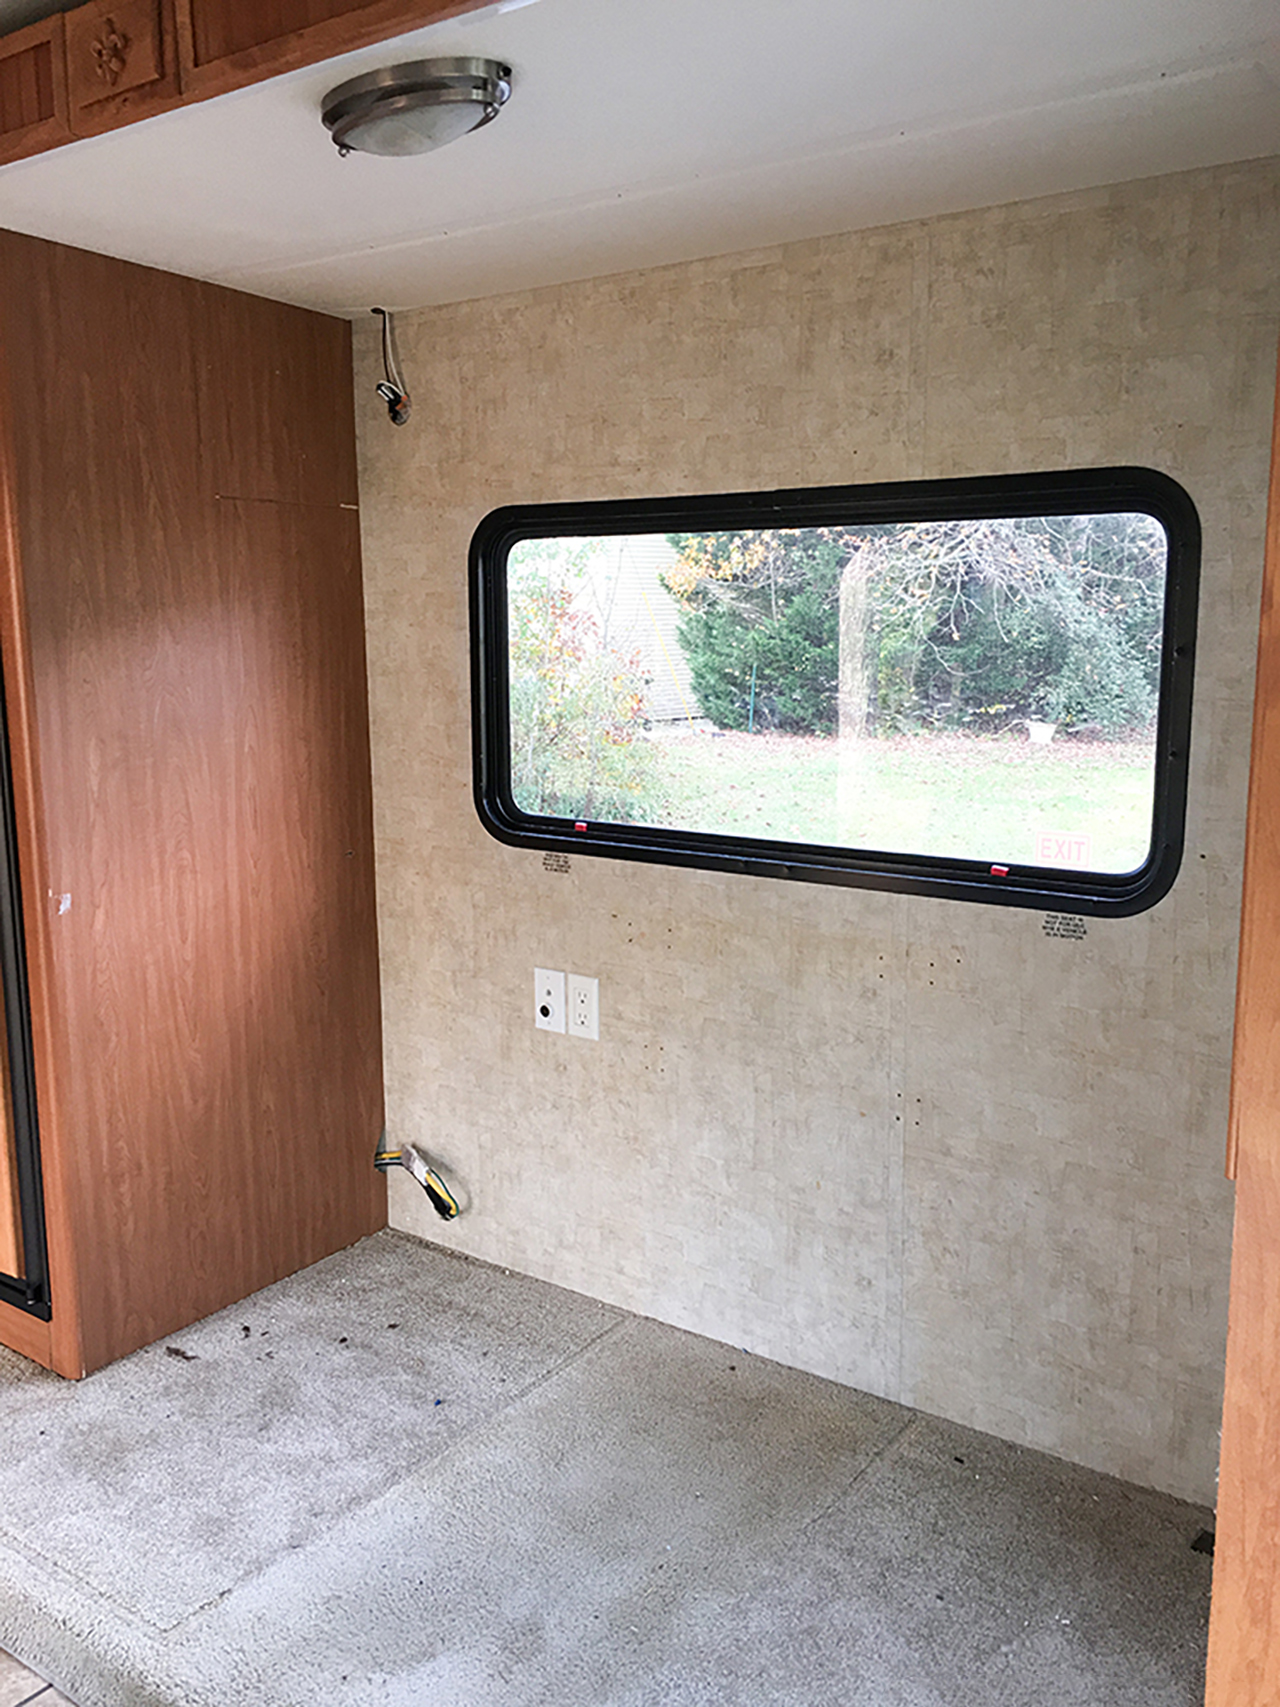 Tips for replacing RV slide out flooring